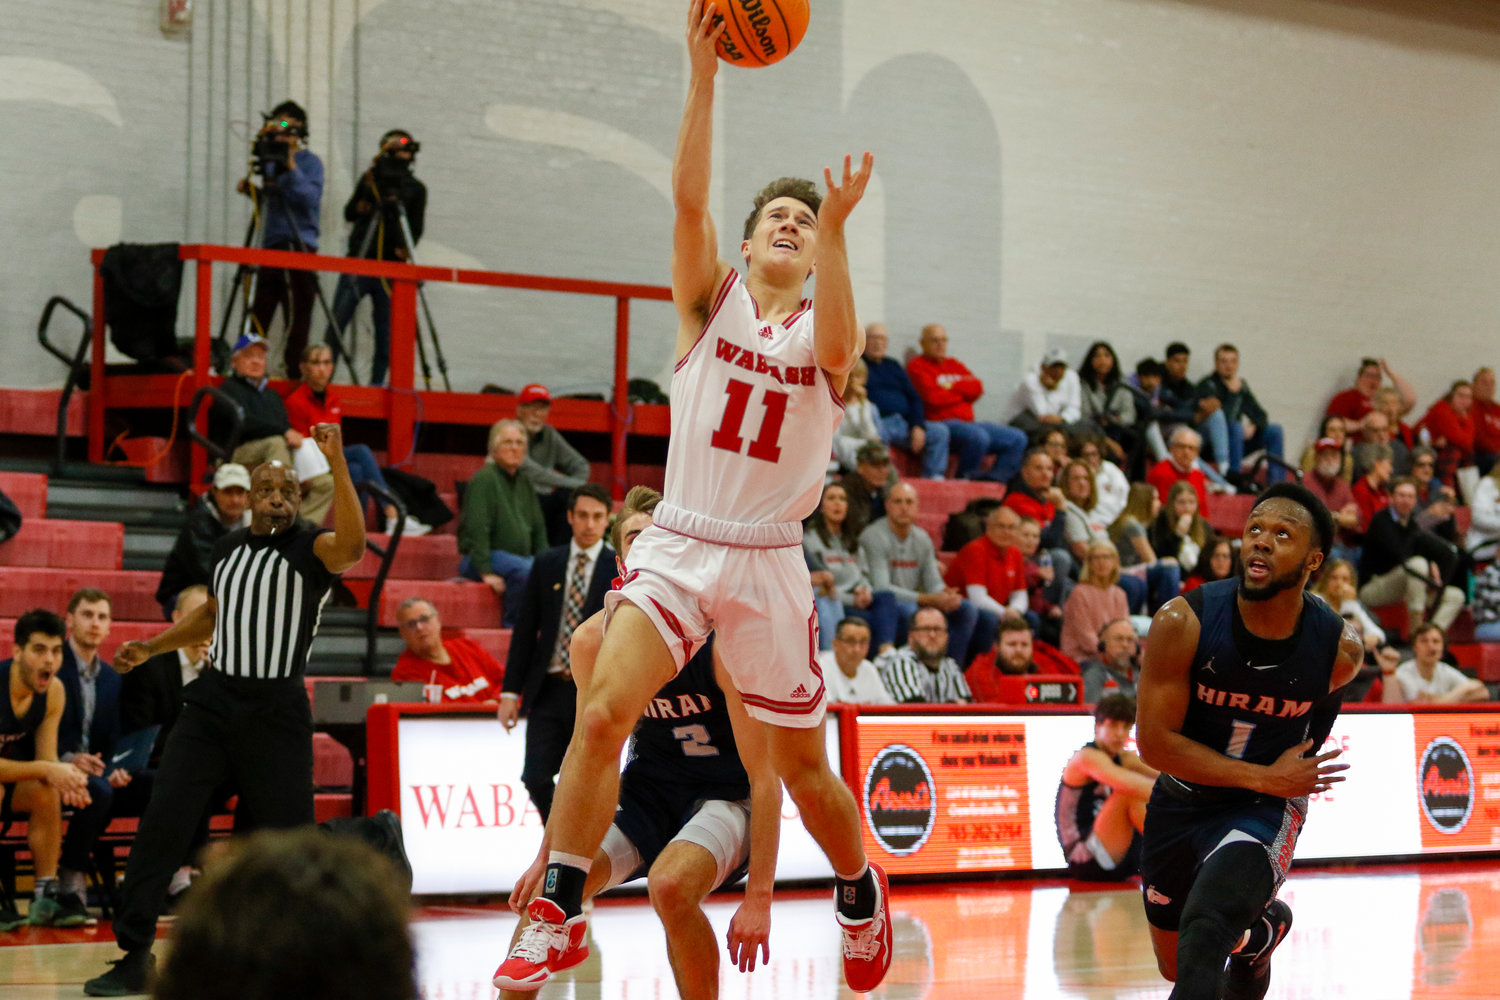 Freshman Randy Kelly gave the Little Giants the spark they needed as he scored 13 points off the bench in Wabash's 80-70 win over Hiram on Saturday.